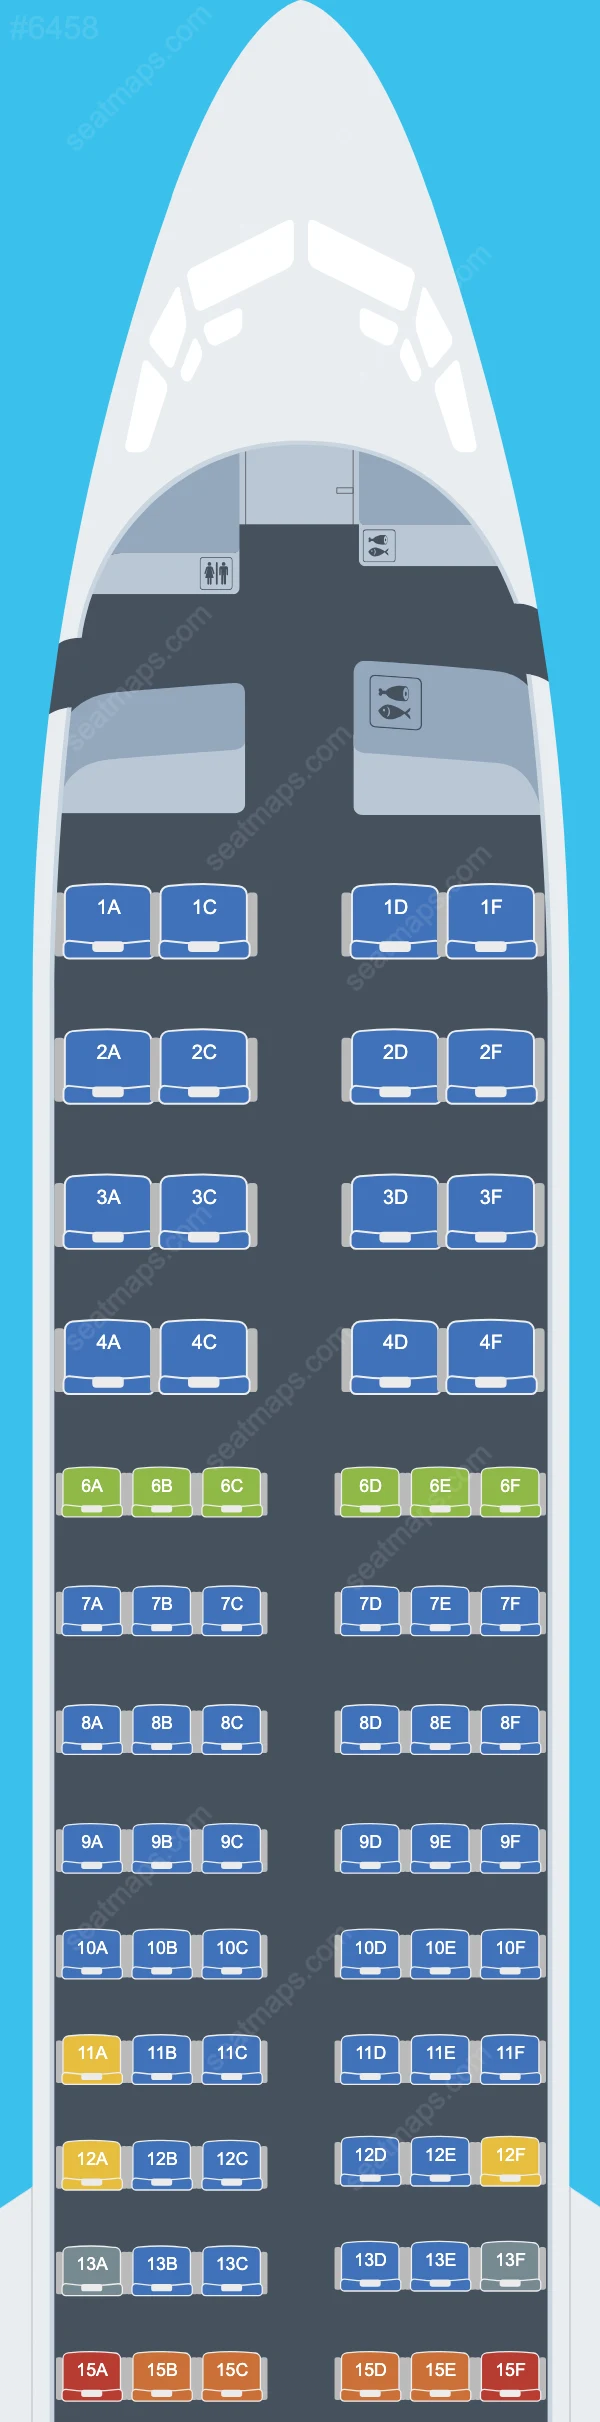 Alaska Airlines Boeing 737 Seat Maps 737-900